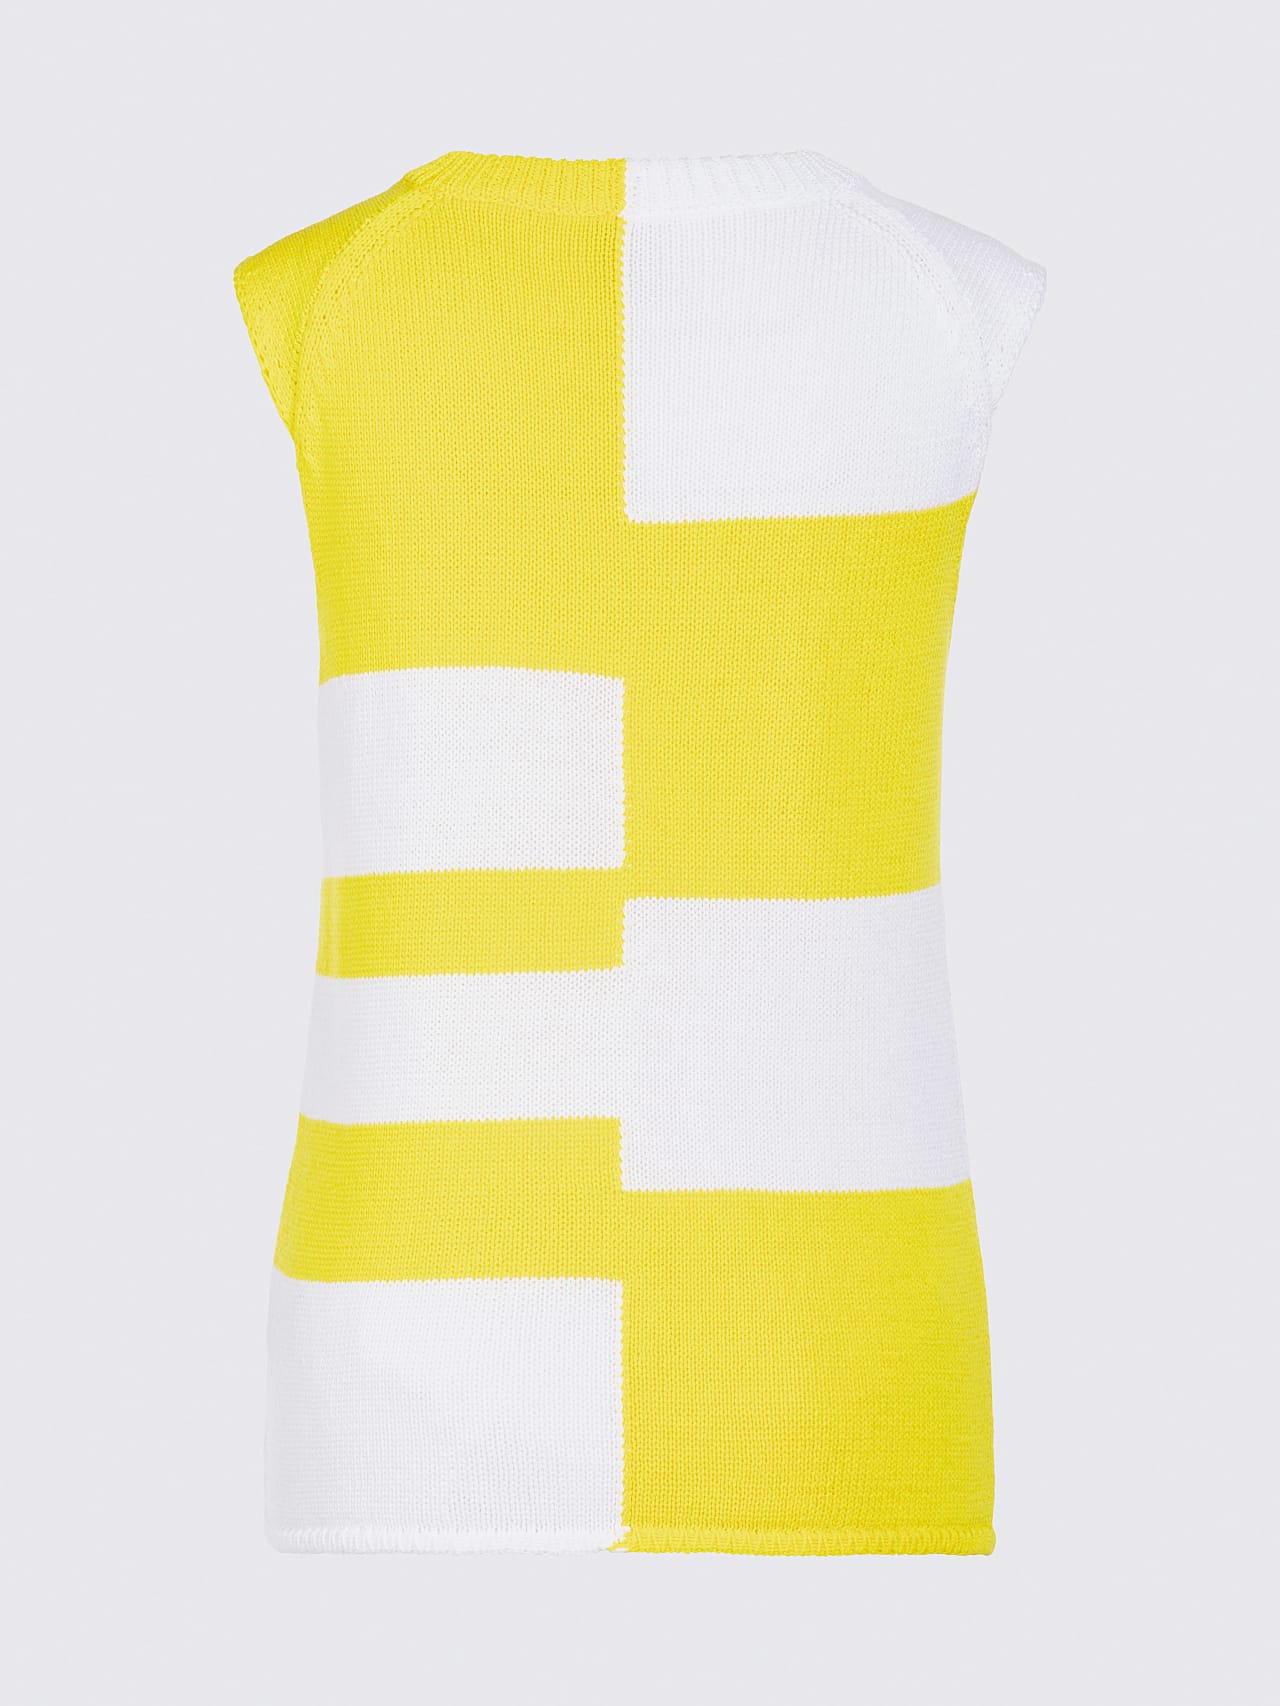 AlphaTauri | FOUTO V1.Y6.01 | Colourblock Knit Top in yellow / white for Women